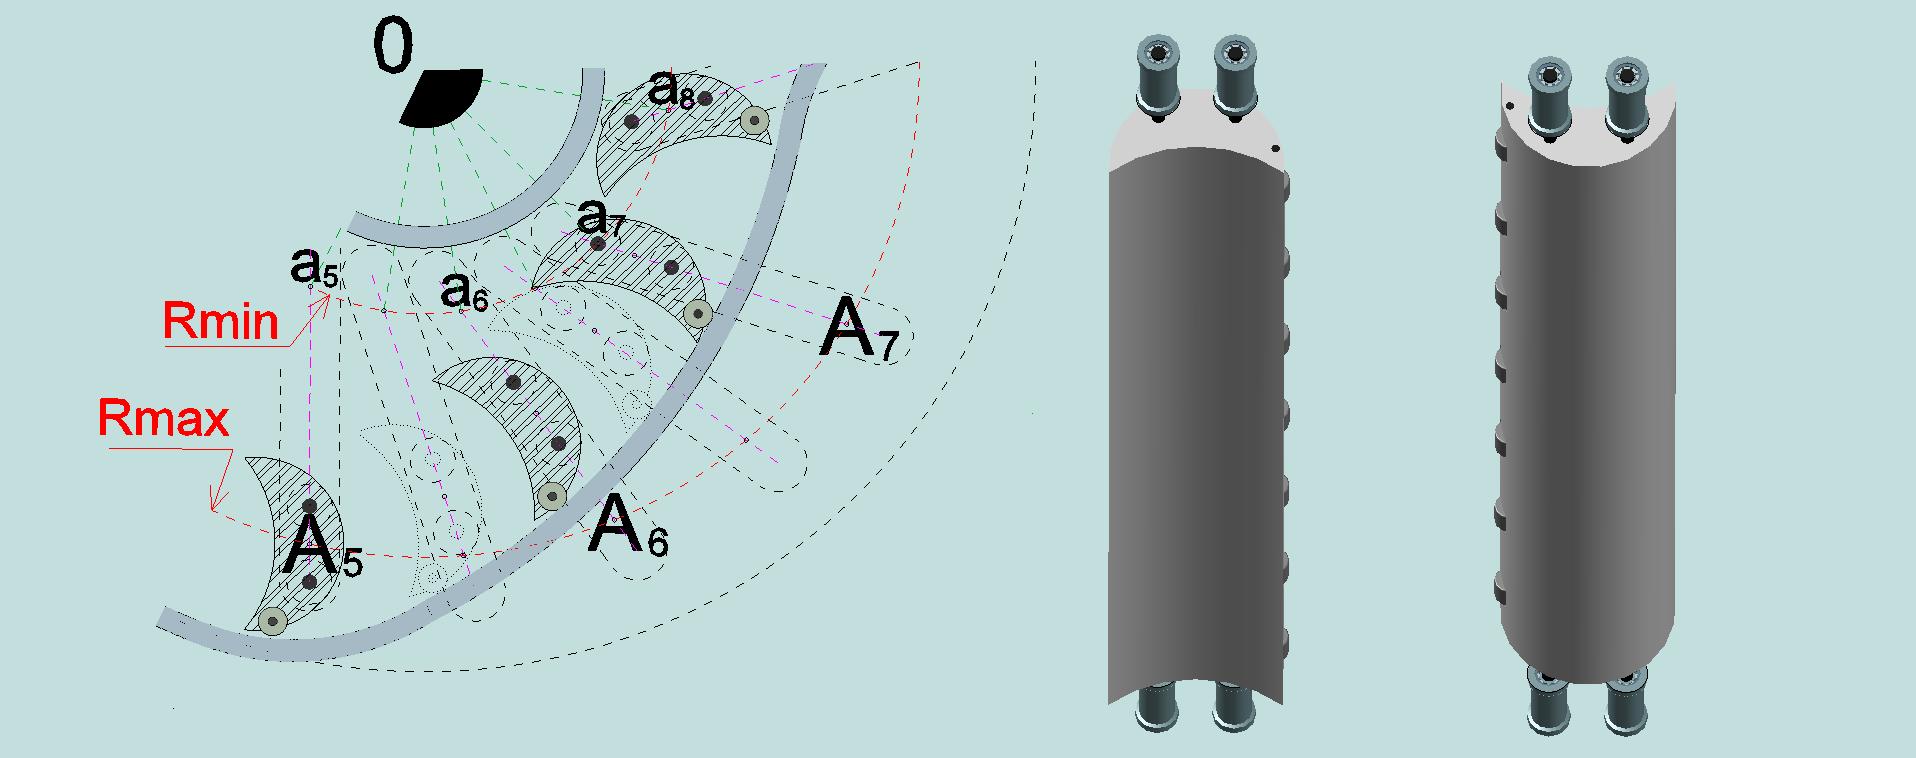 The cross section of the rotor in sector A6 - O - A8, and movable blade, with side wheels, in two views.